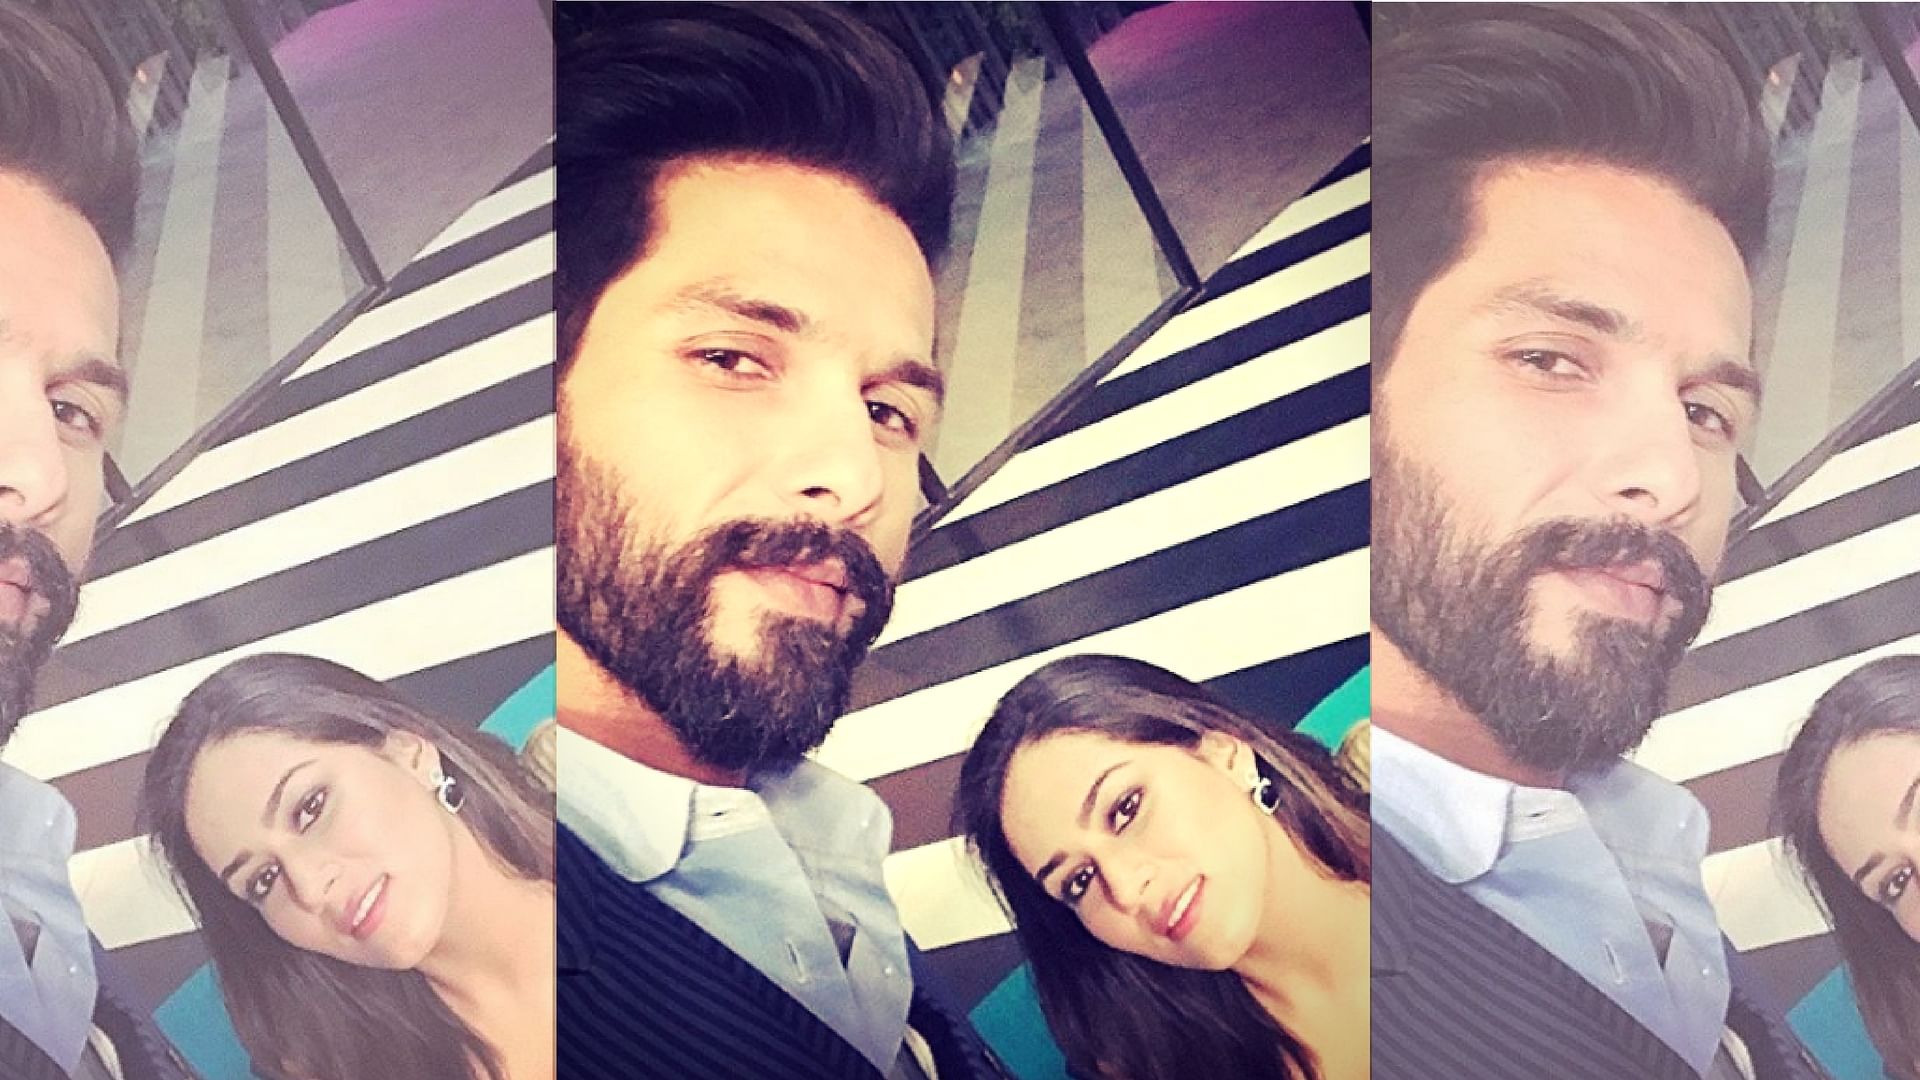 Shahid and Mira will appear together on <i>Koffee with Karan</i>. (Photo Courtesy: Instagram)